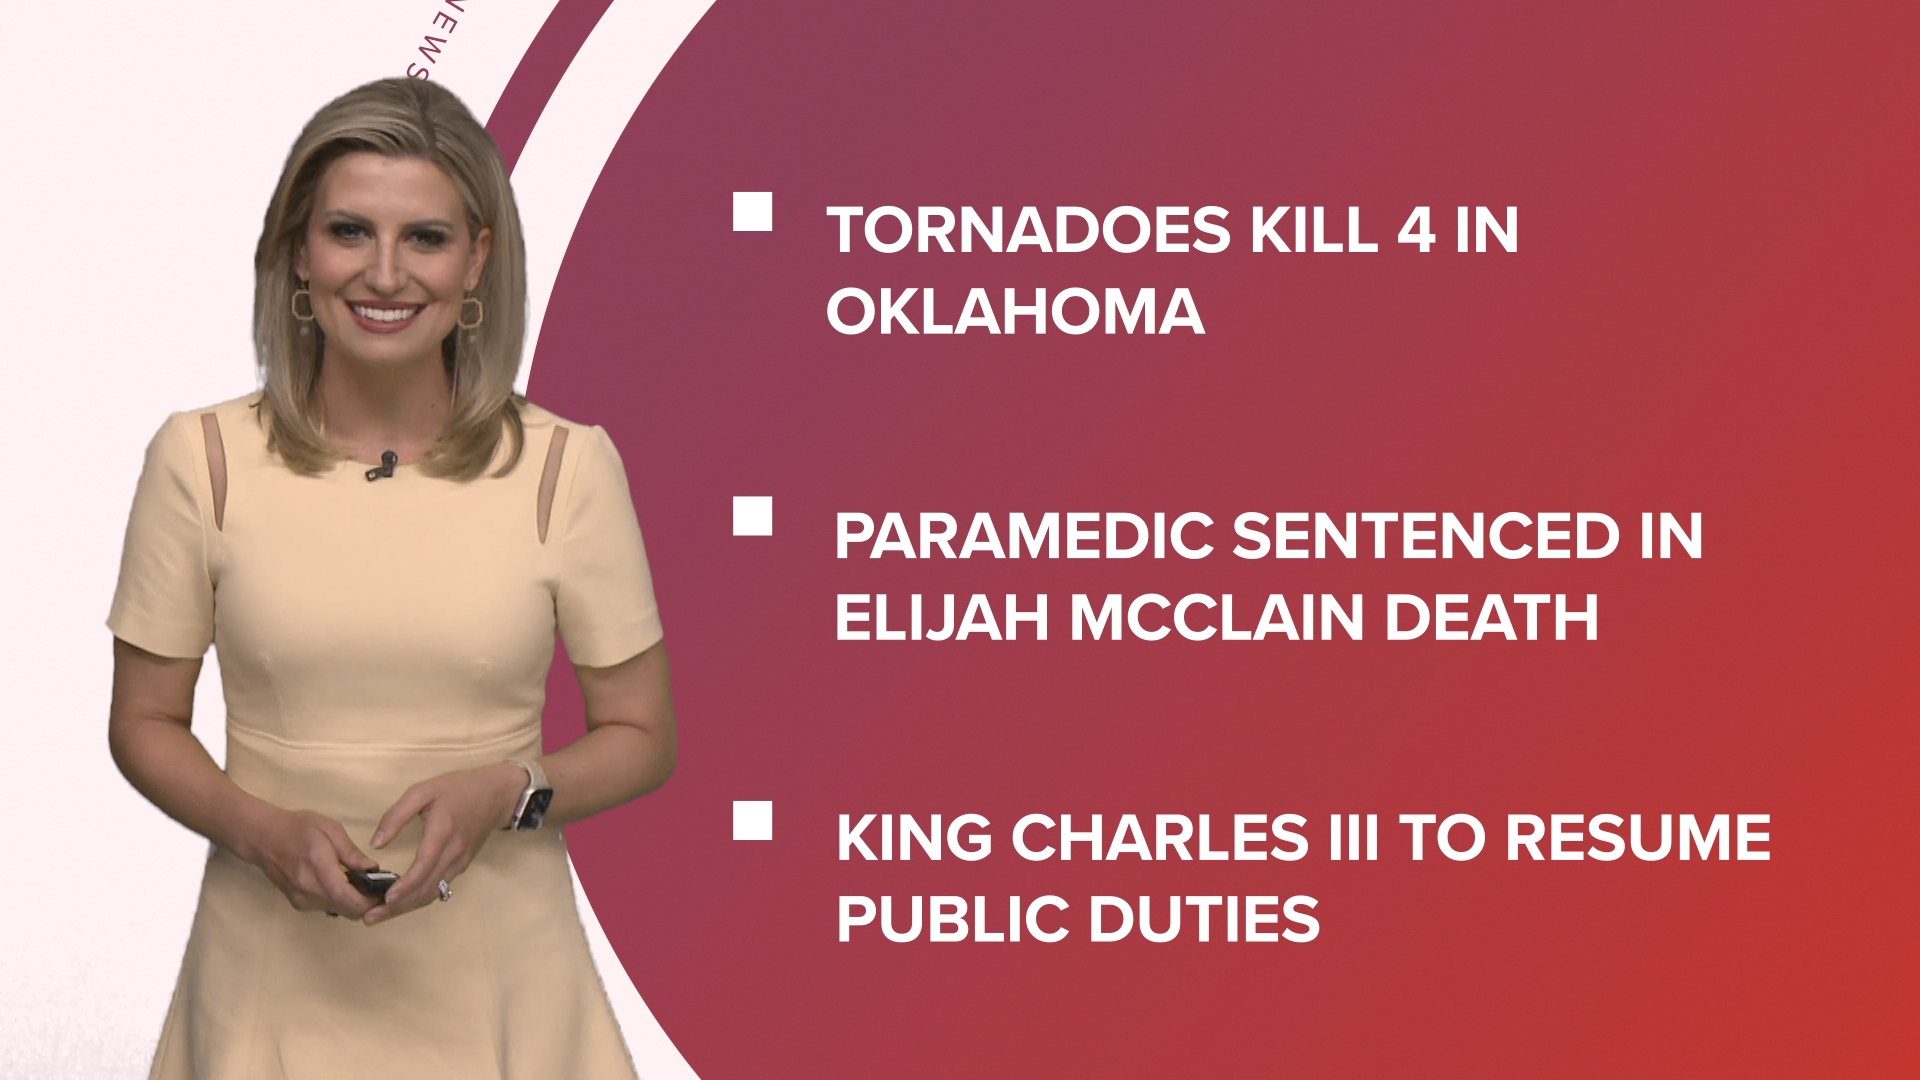 A look at what is happening in the news from deadly tornadoes hit Oklahoma to a second paramedic sentenced in Elijah McClain's death and zebras on the loose.